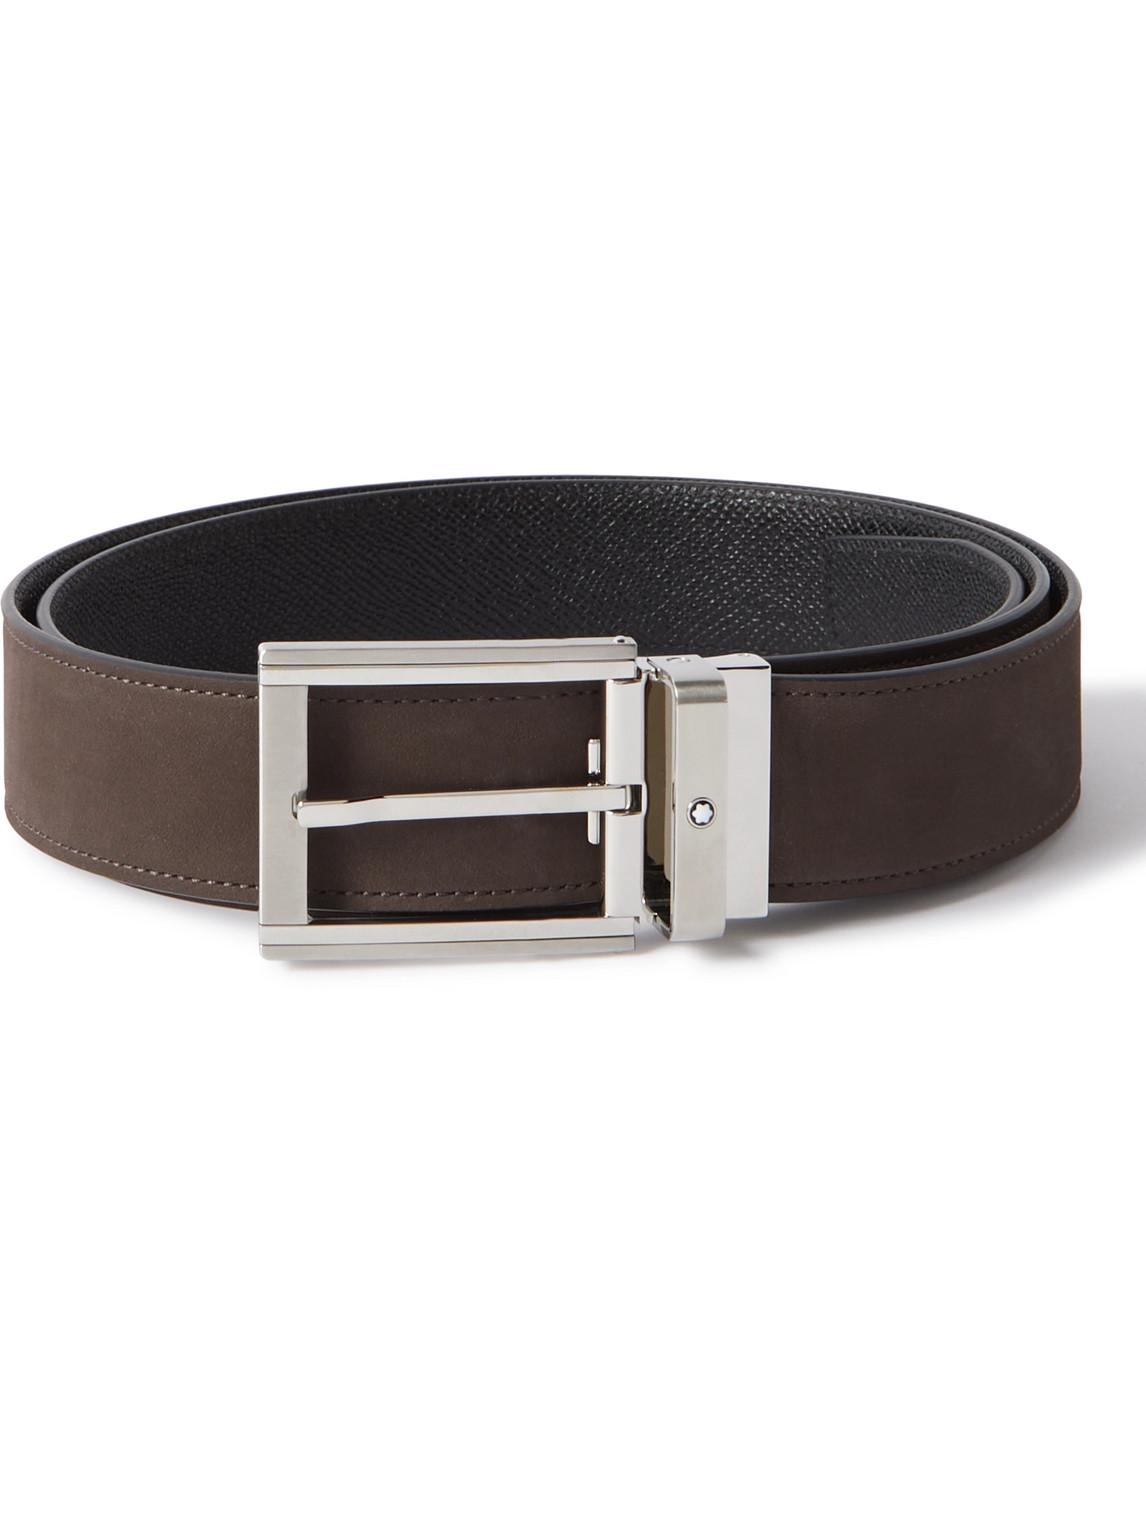 Reversible belt in smooth and pebbled leather